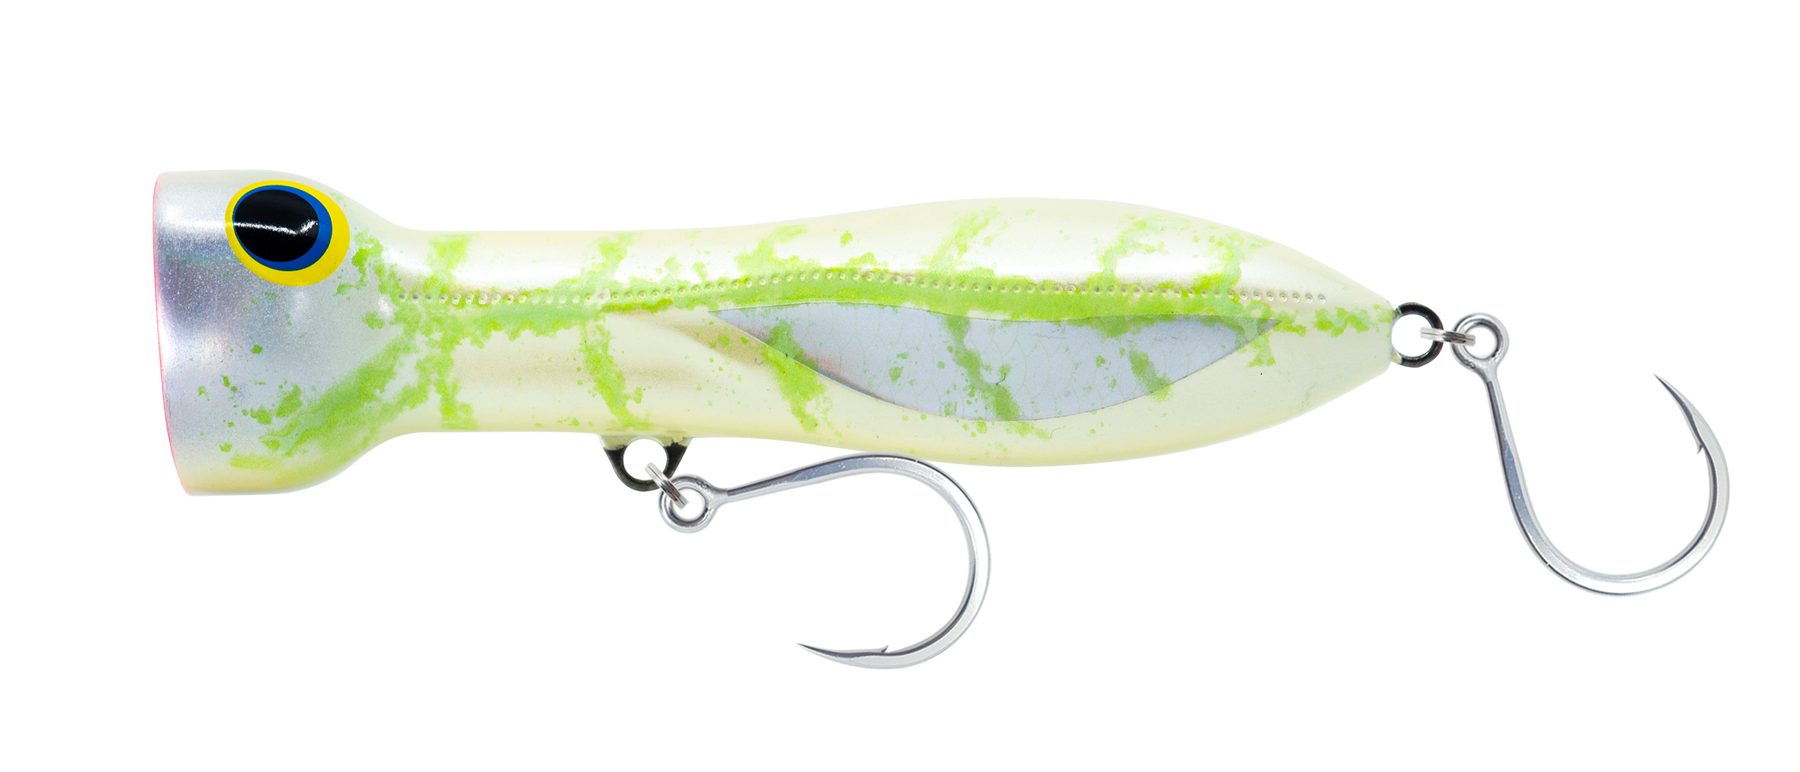 Nomad Design Chug Norris Popper - Holo Ghost Shad 120mm